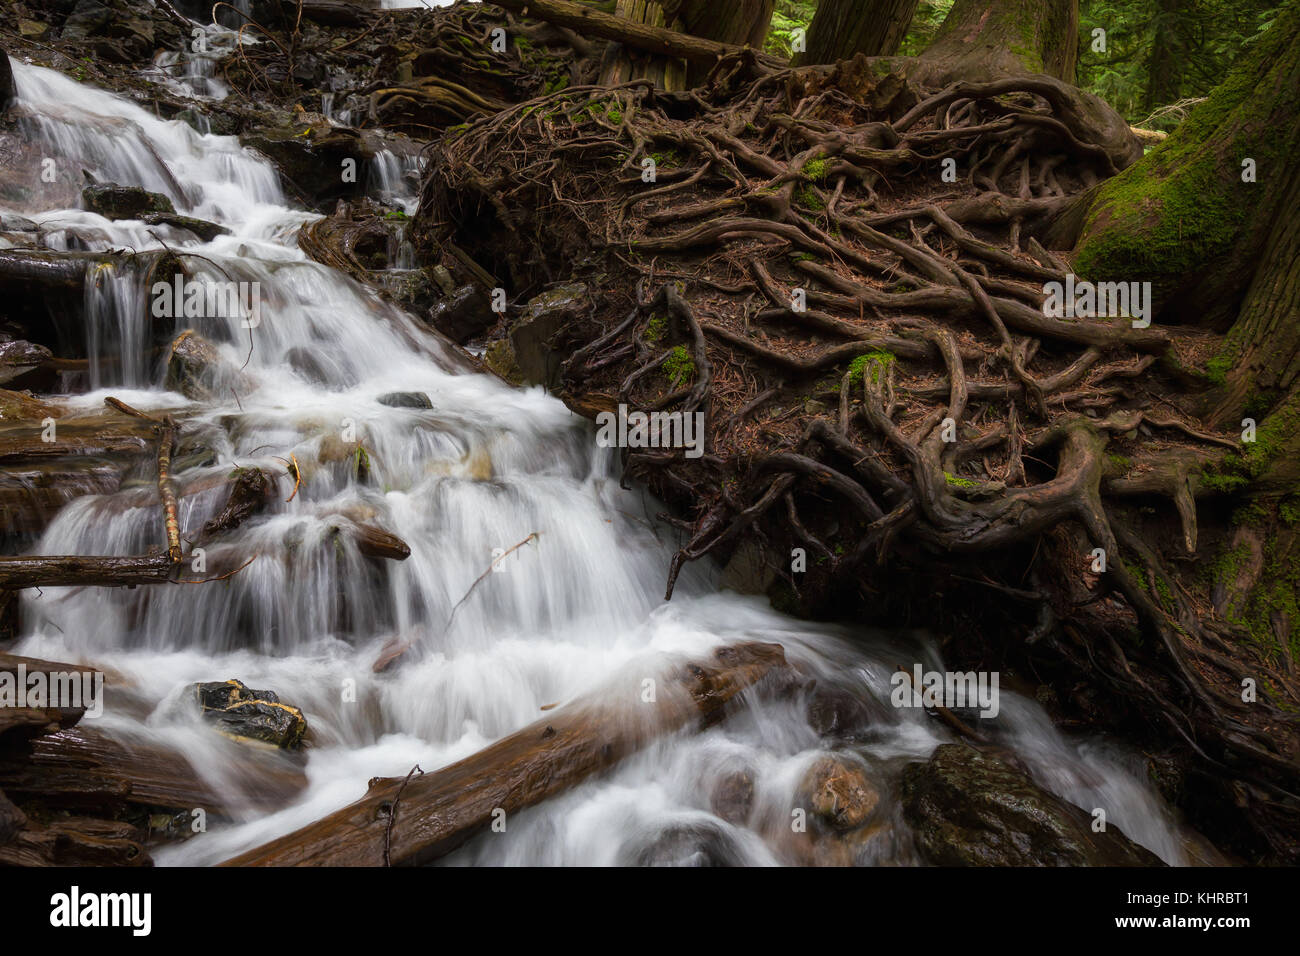 Beautiful river flowing around the rocks and tree roots. Taken in Bridal Veil Falls Provincial Park, British Columbia, Canada. Stock Photo